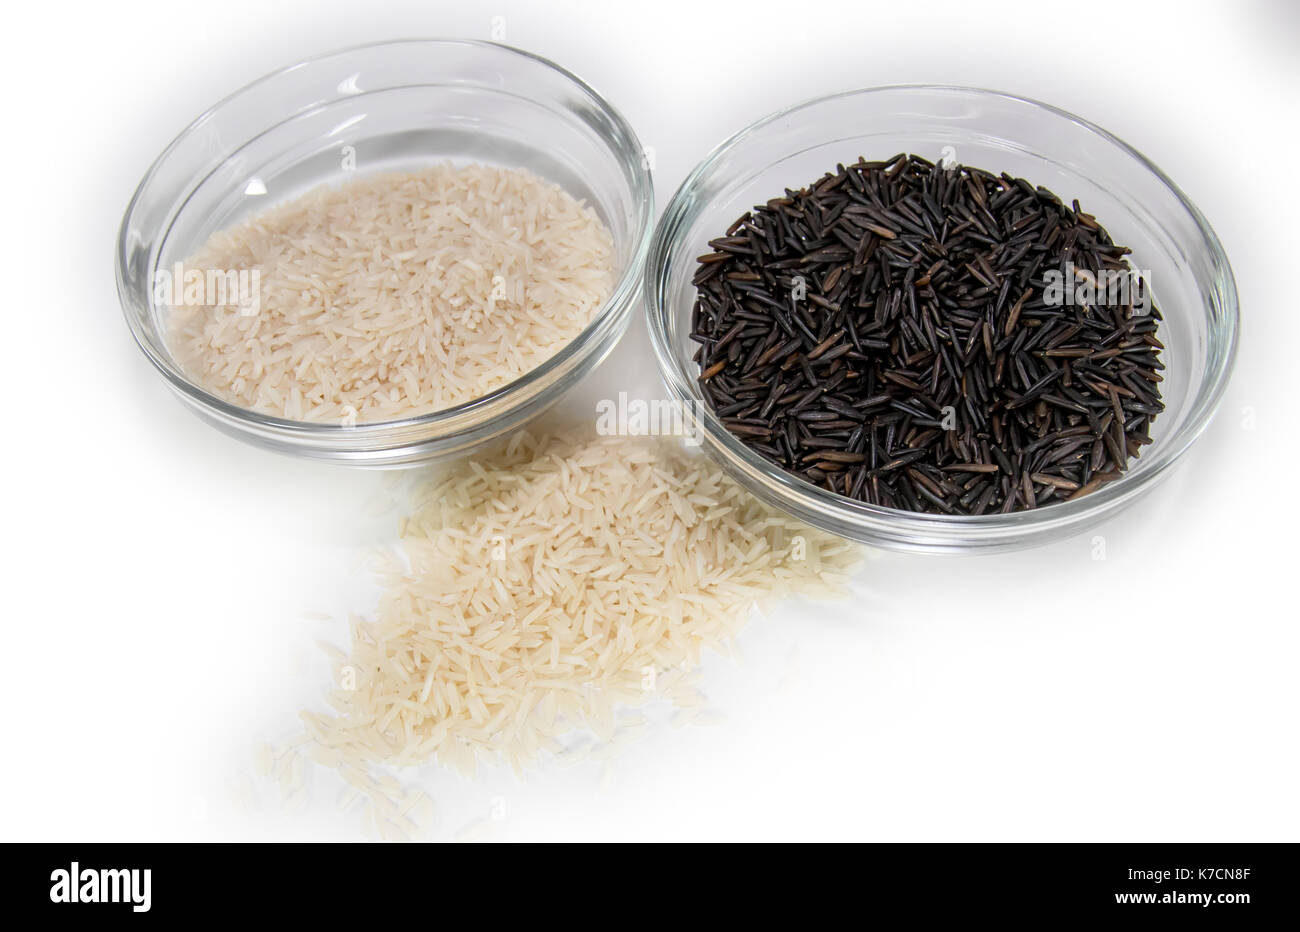 Basmati and wild rice in clear glass bowls Stock Photo